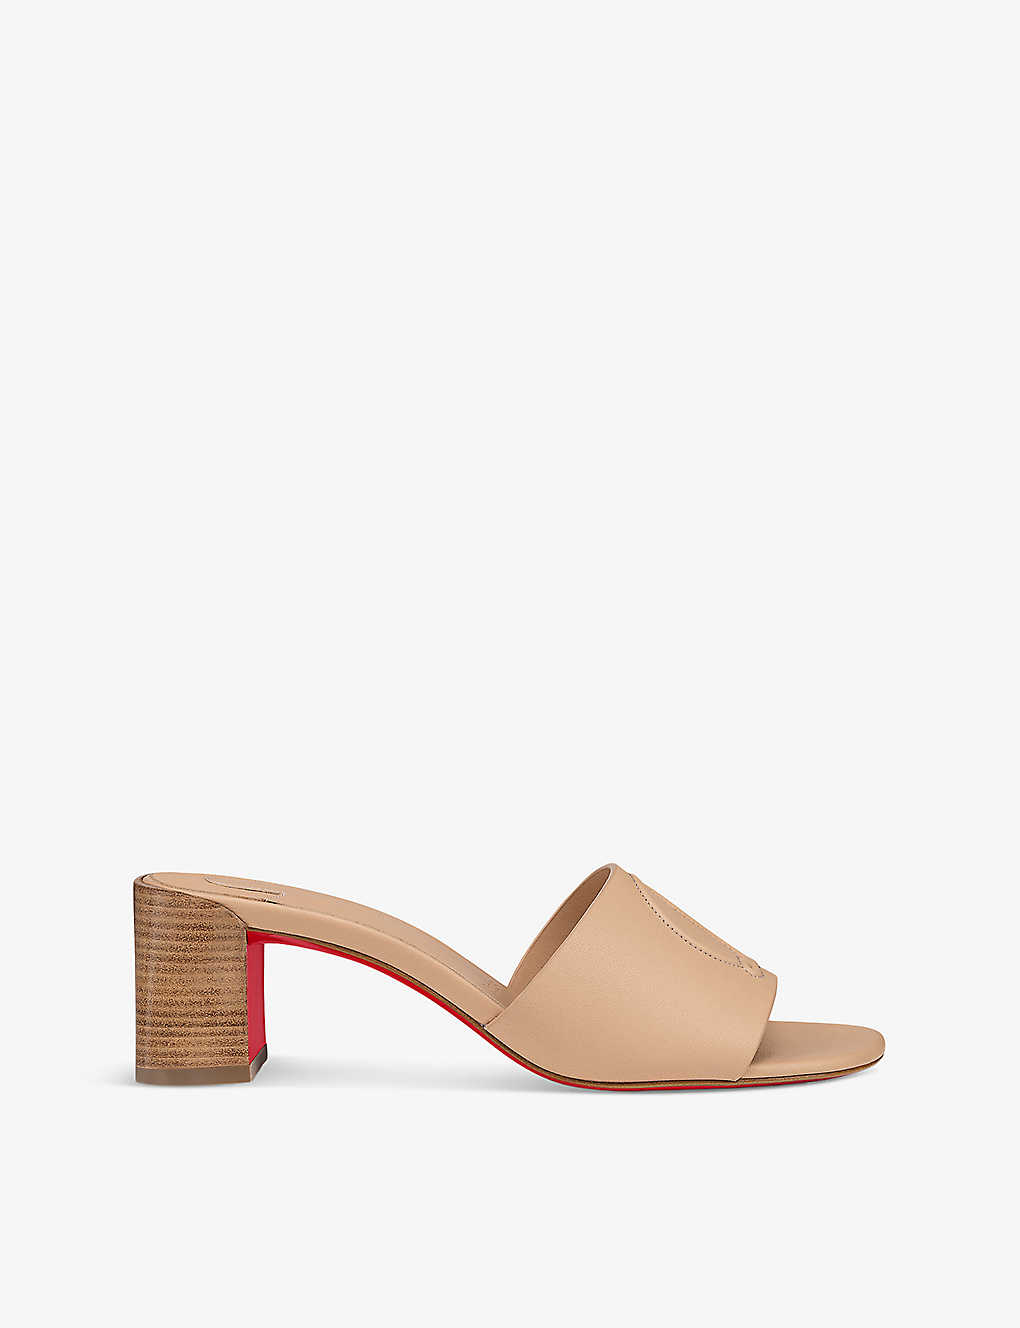 Shop Christian Louboutin Women's Leche Scuro So Cl 55 Leather Heeled Mules